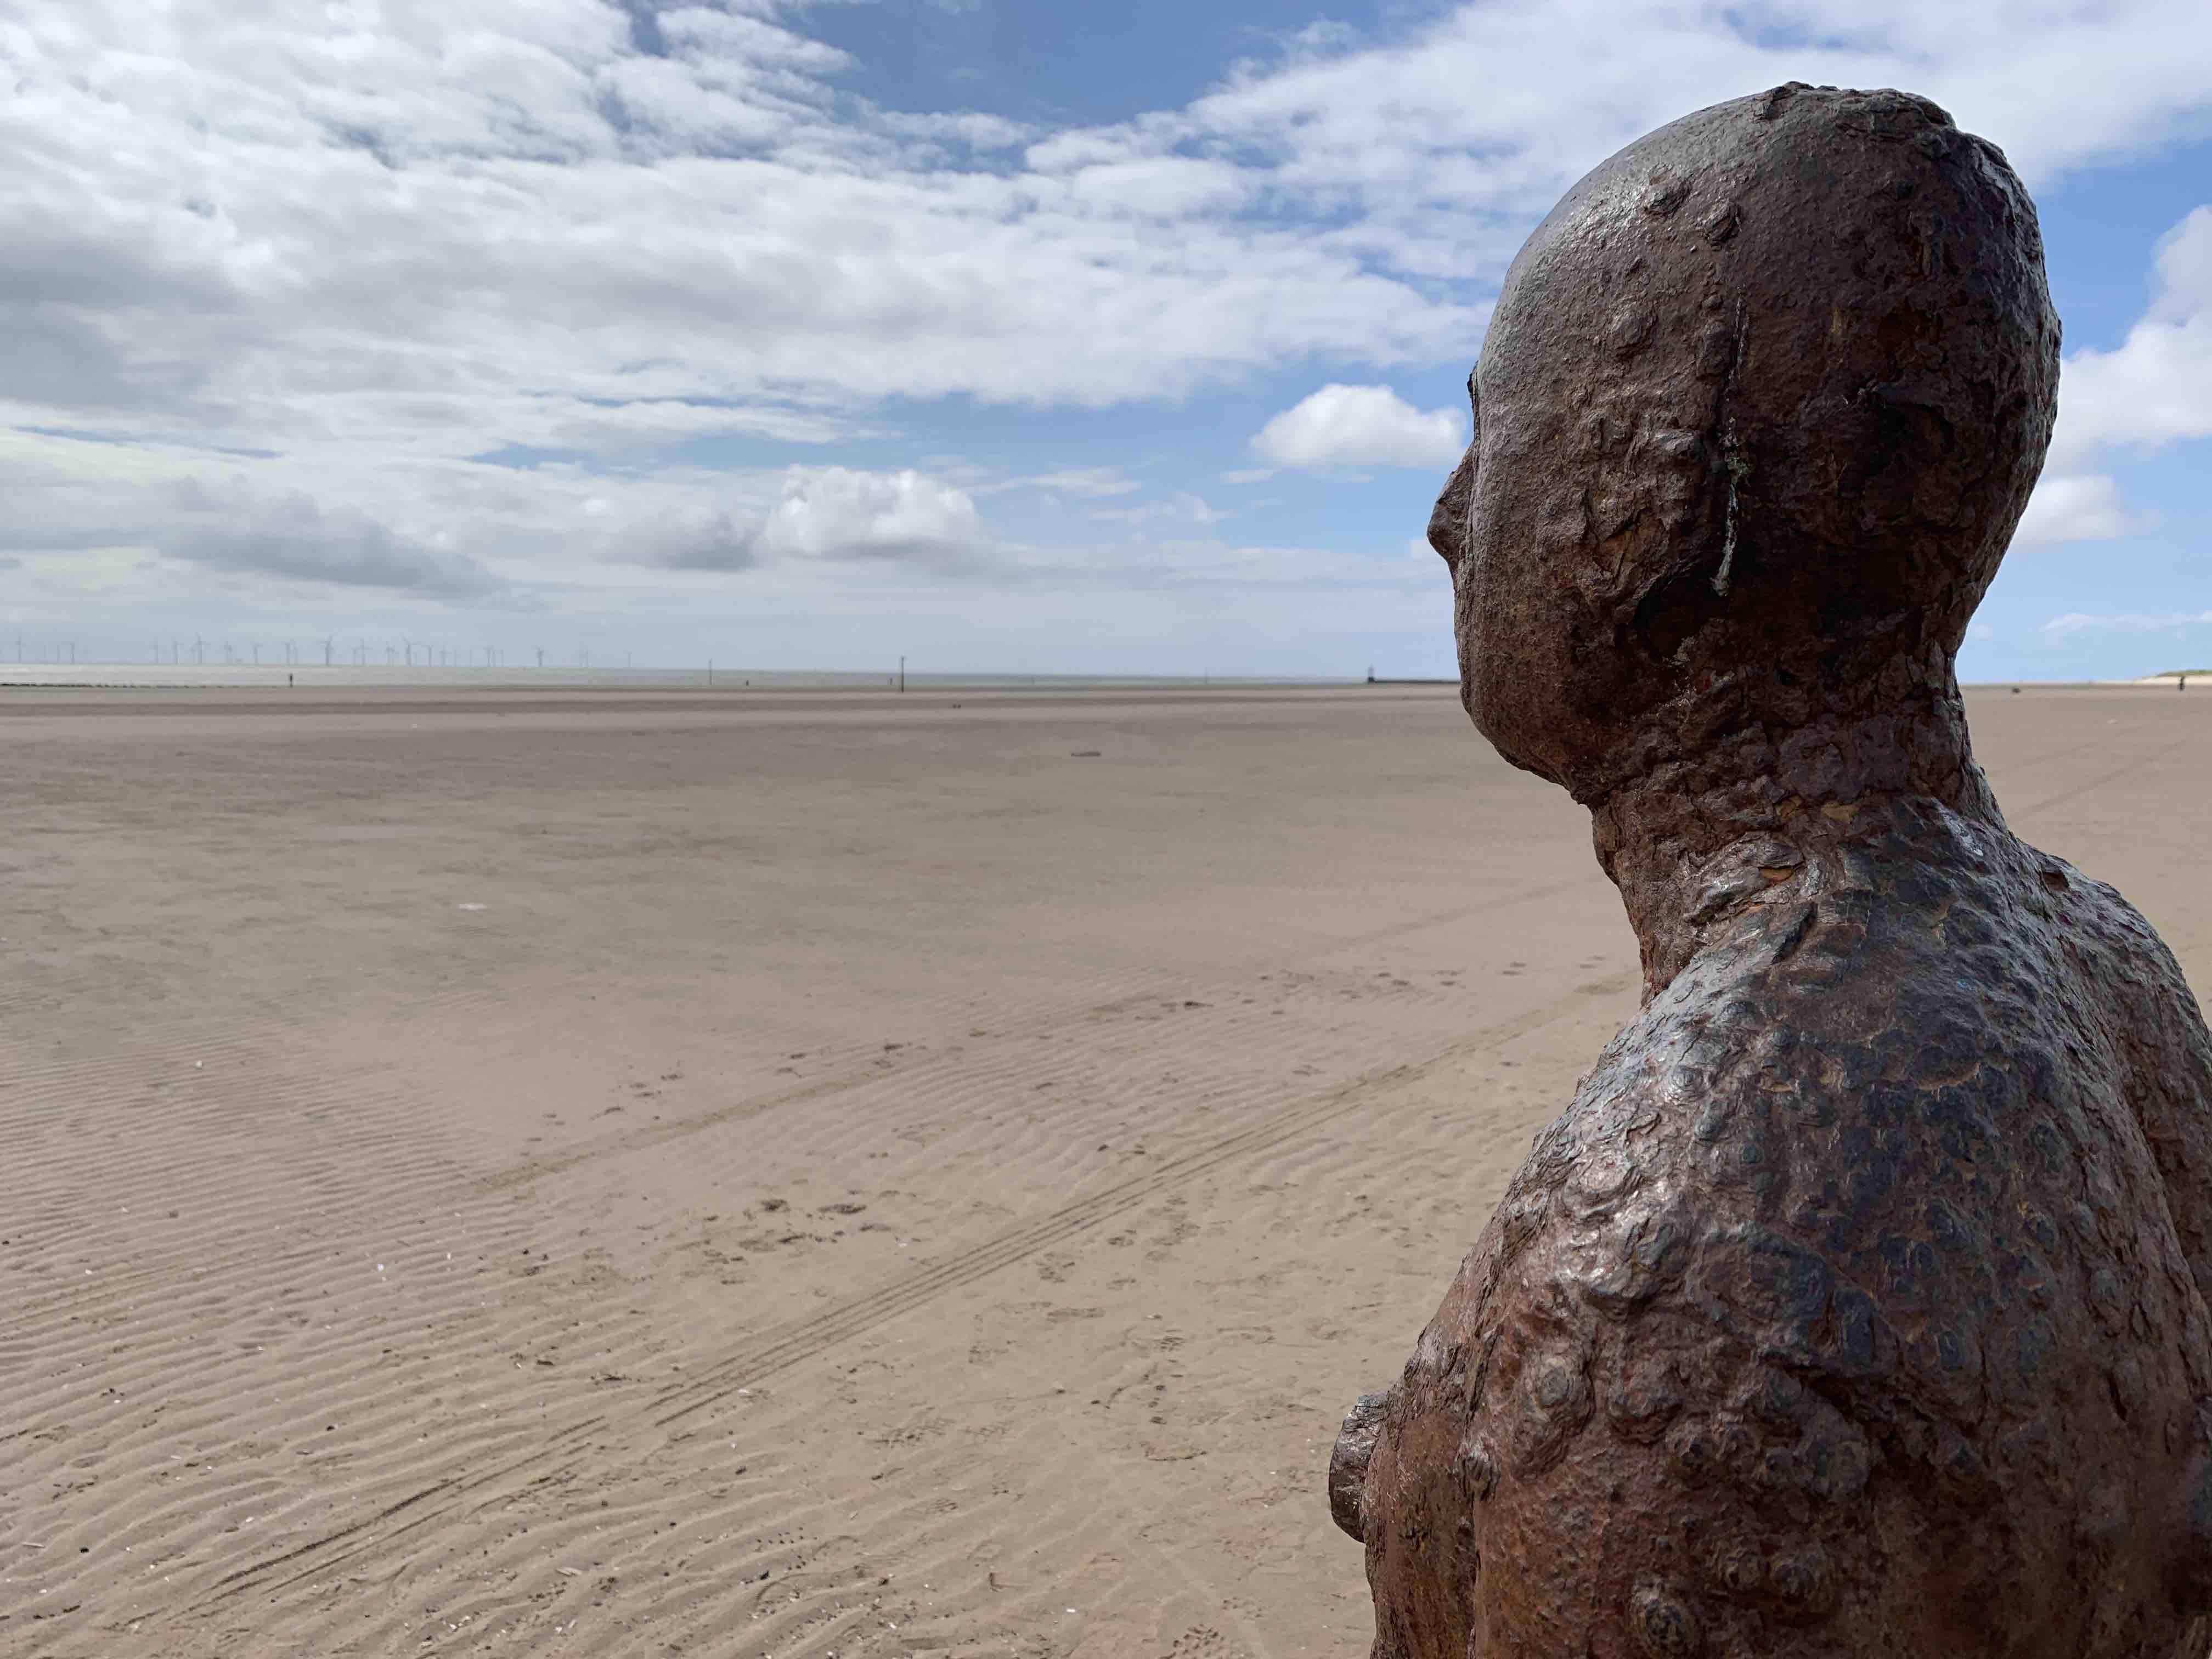 Over the shoulder, looking out to sea of the head and torso of one of The Iron Men of Crosby Beach installation, Liverpool